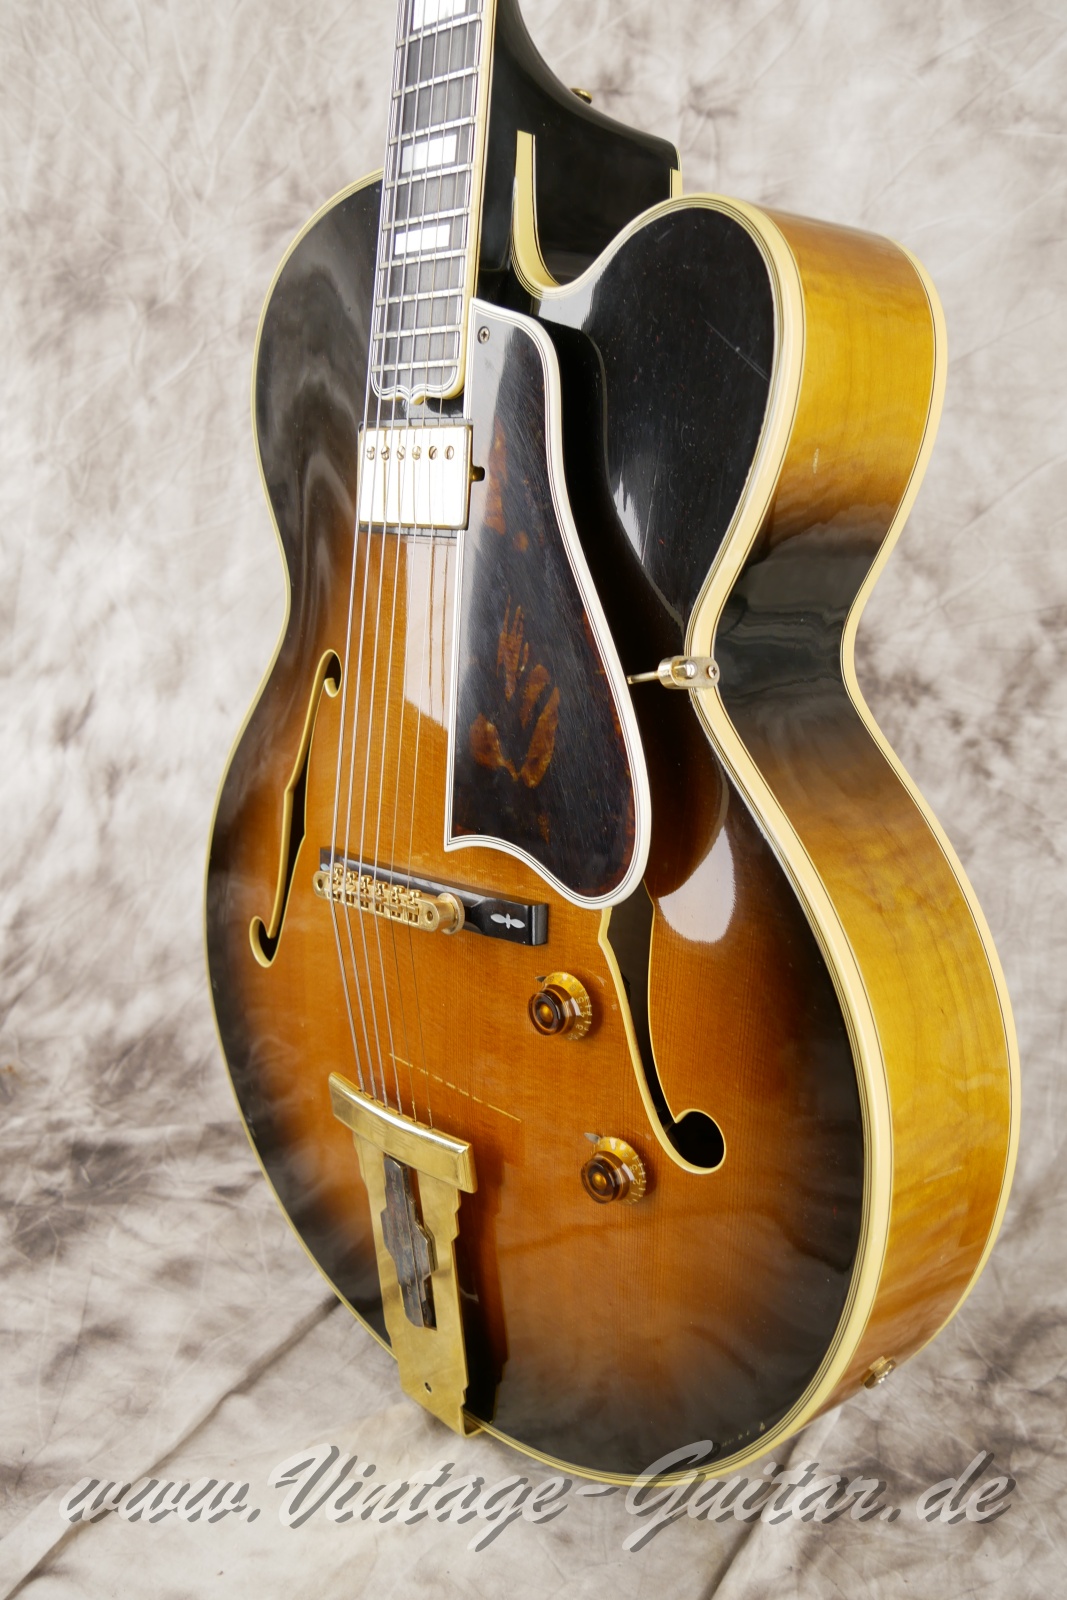 Gibson-L5-Wes-Montgomery-1993-Master-Model-James-Hutchins-006.JPG